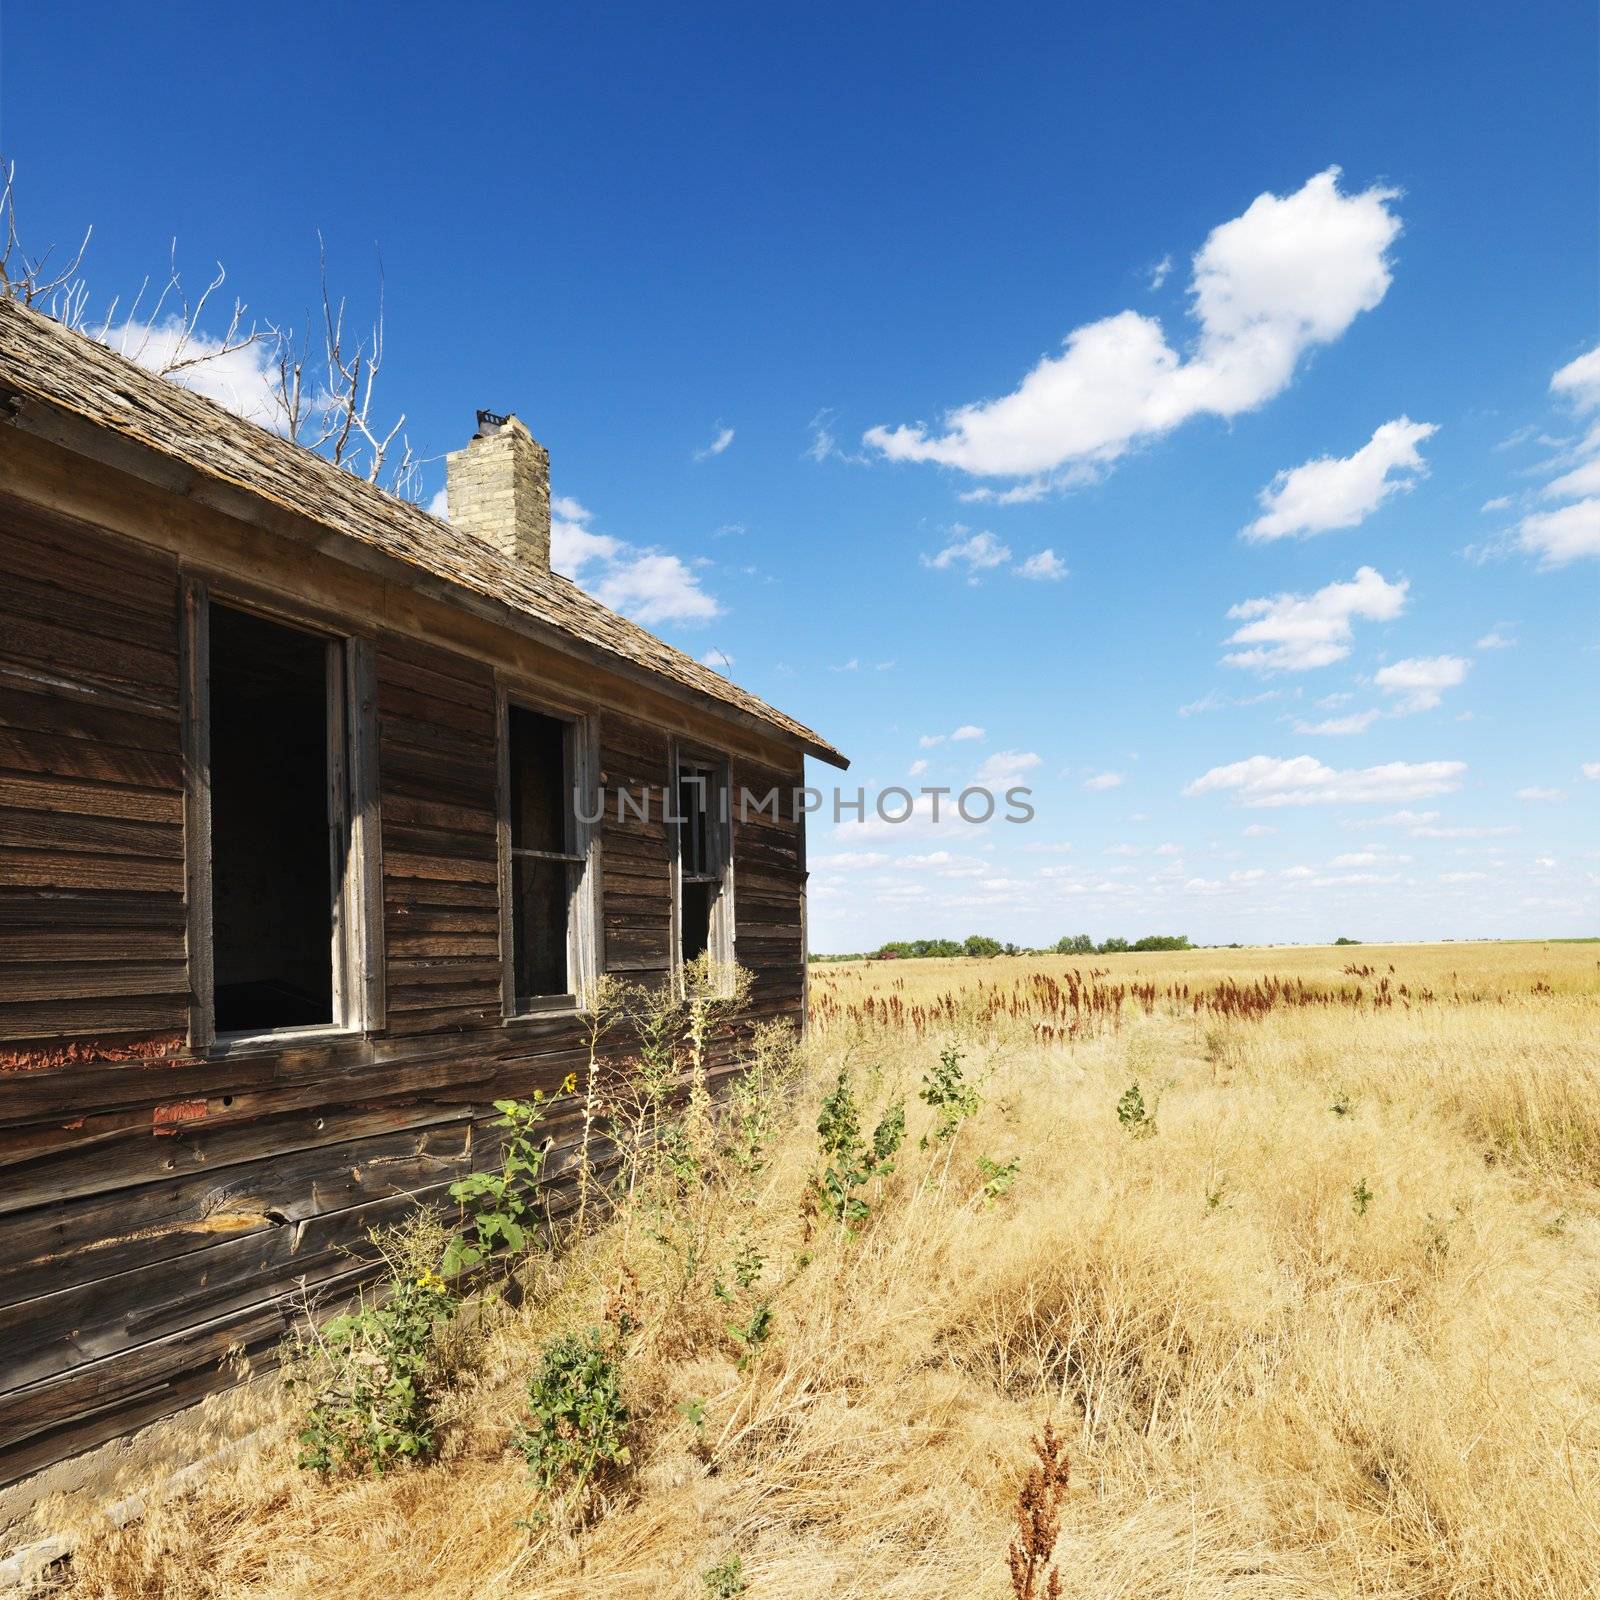 Side of wooden dilapidated building in rural field.